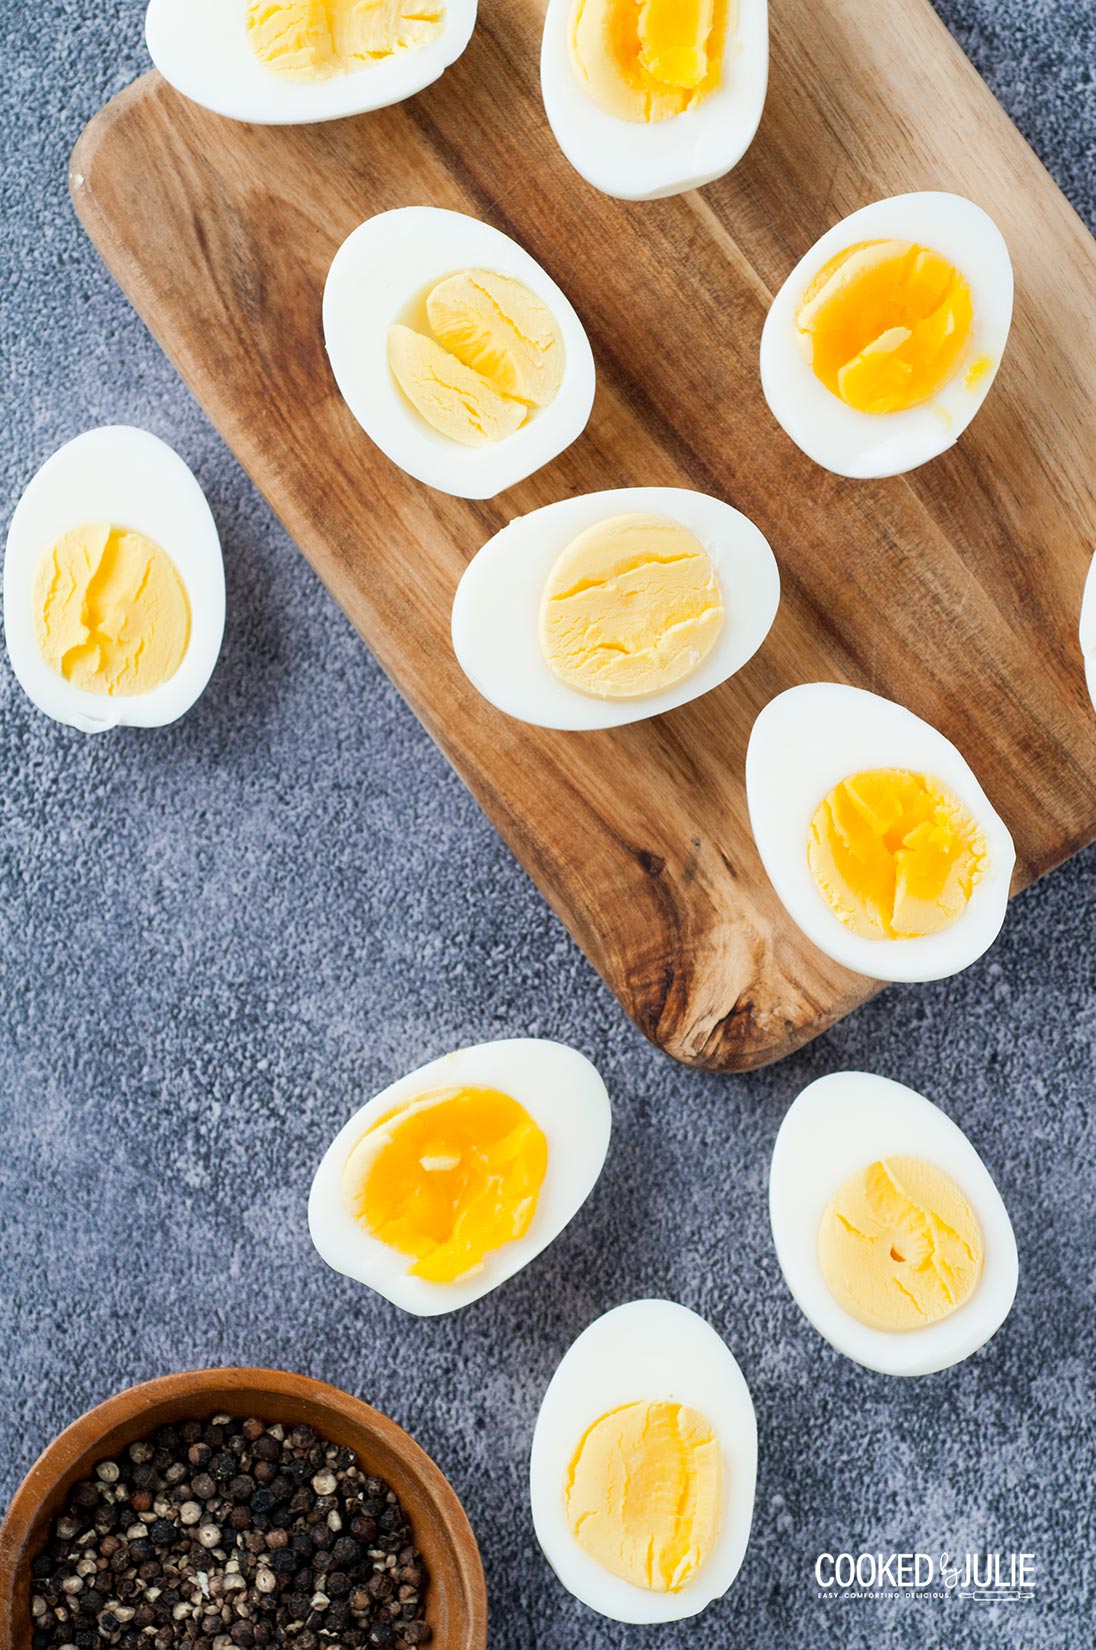 https://www.cookedbyjulie.com/wp-content/uploads/2019/11/boiled-eggs-one.jpg